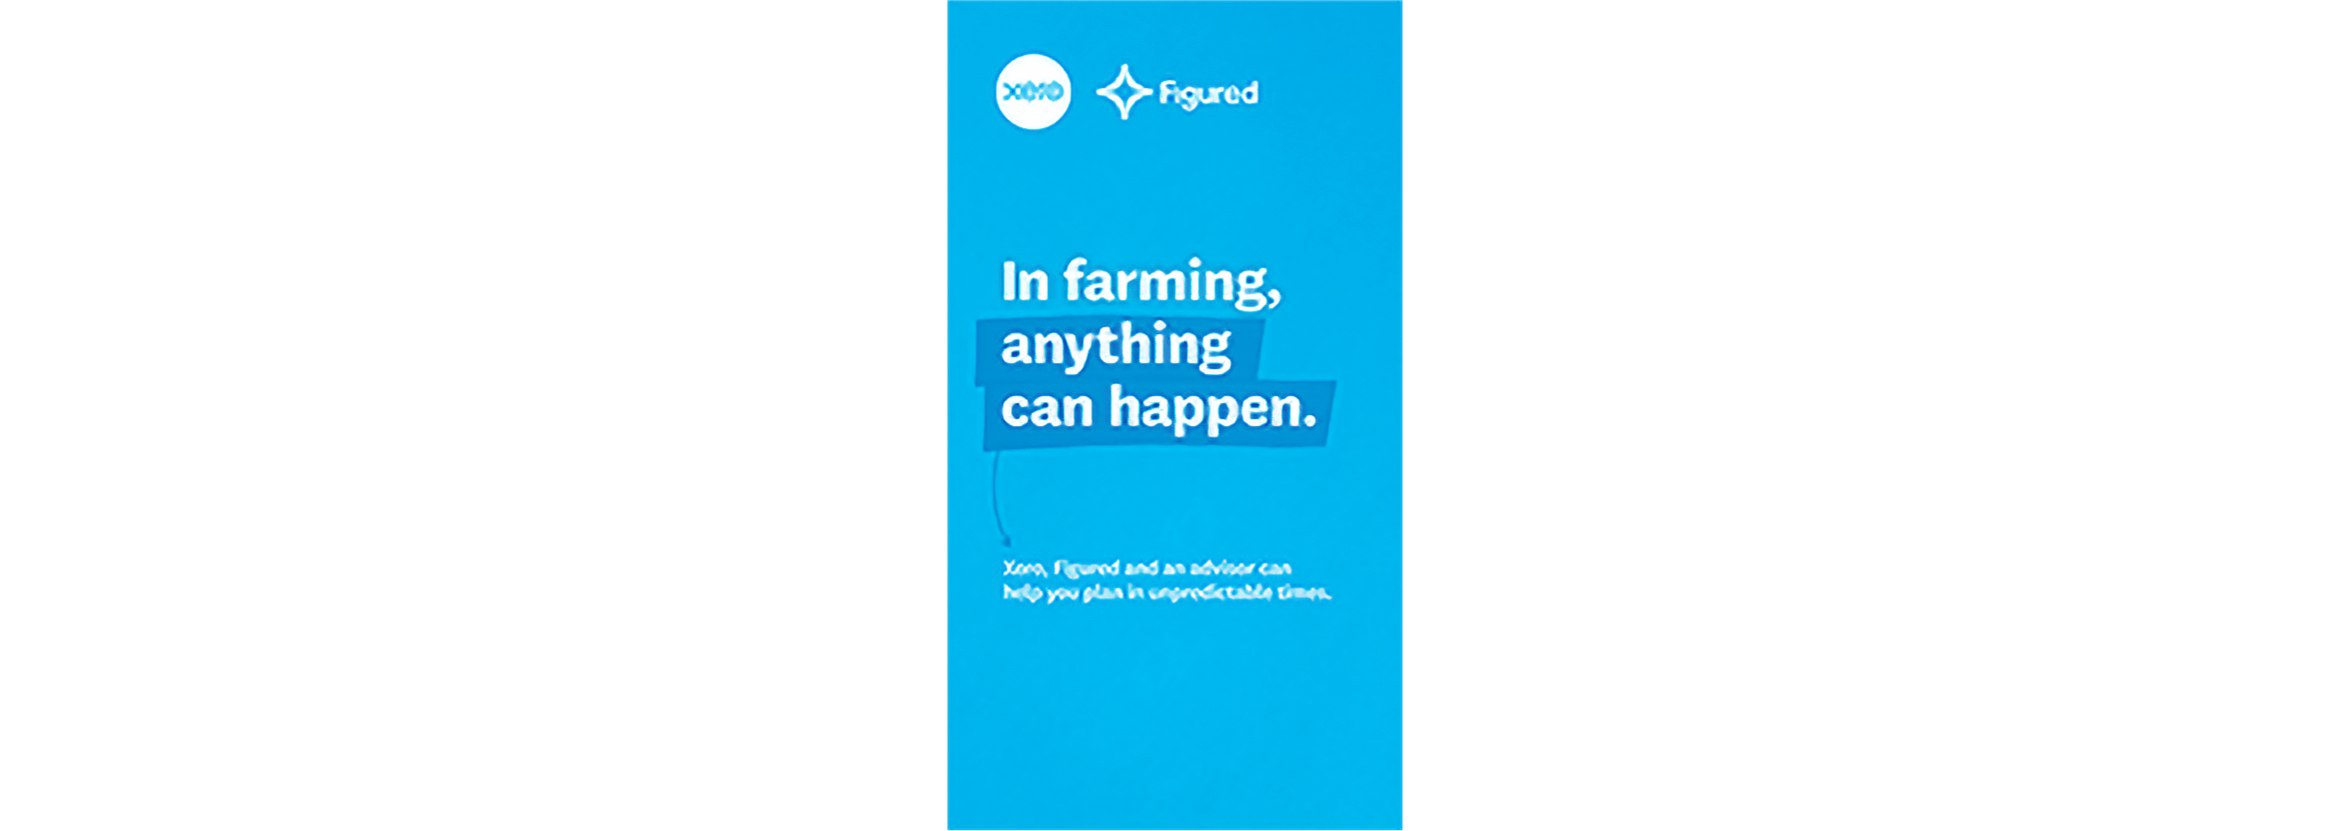 In farming, anything can happen. Roller banner featuring Xero and Figured logos.